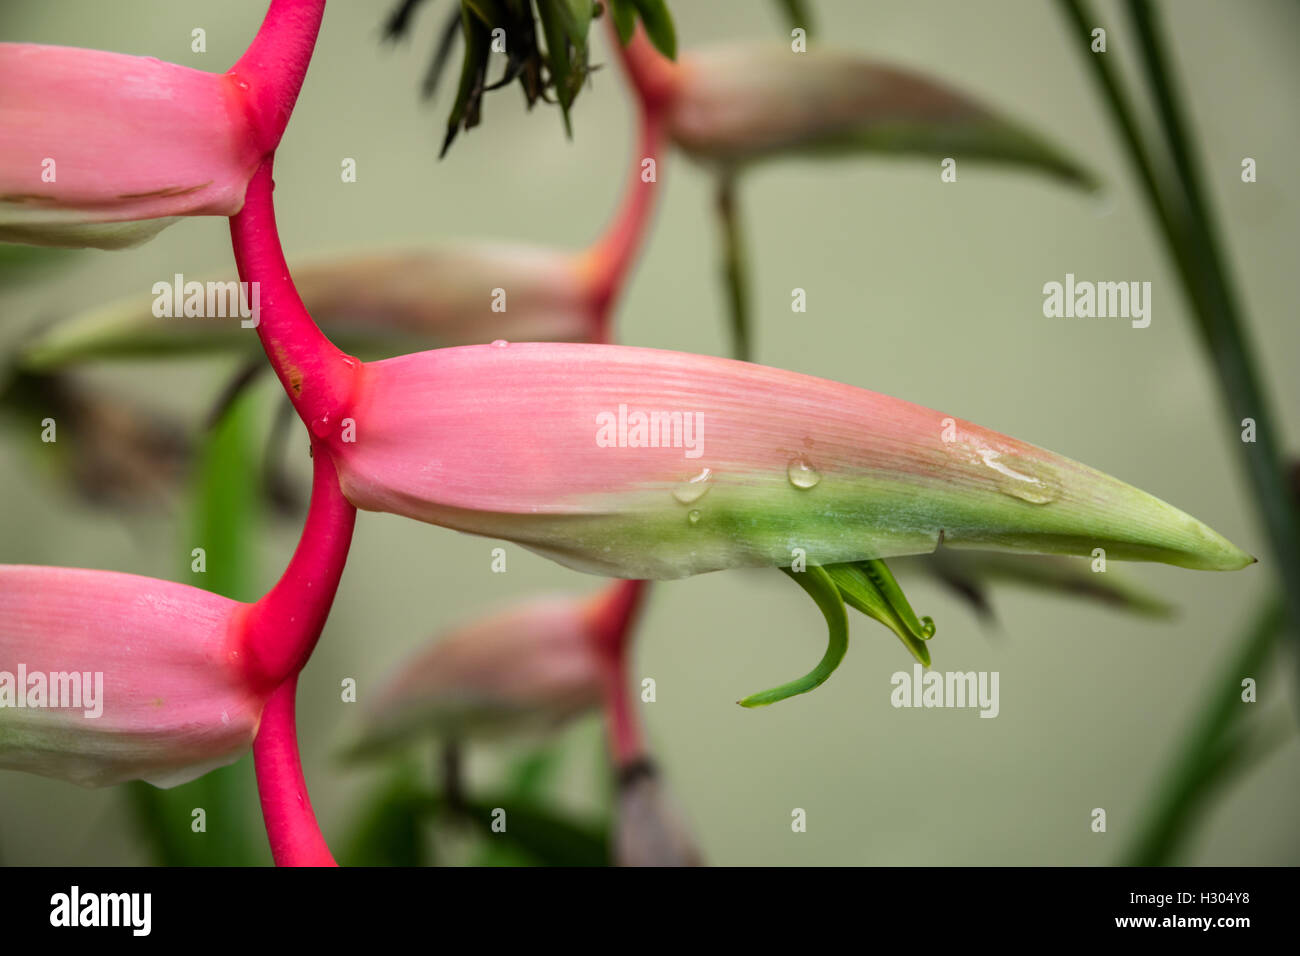 lobster claw, pink tropical heliconia flower, close-up view Stock Photo